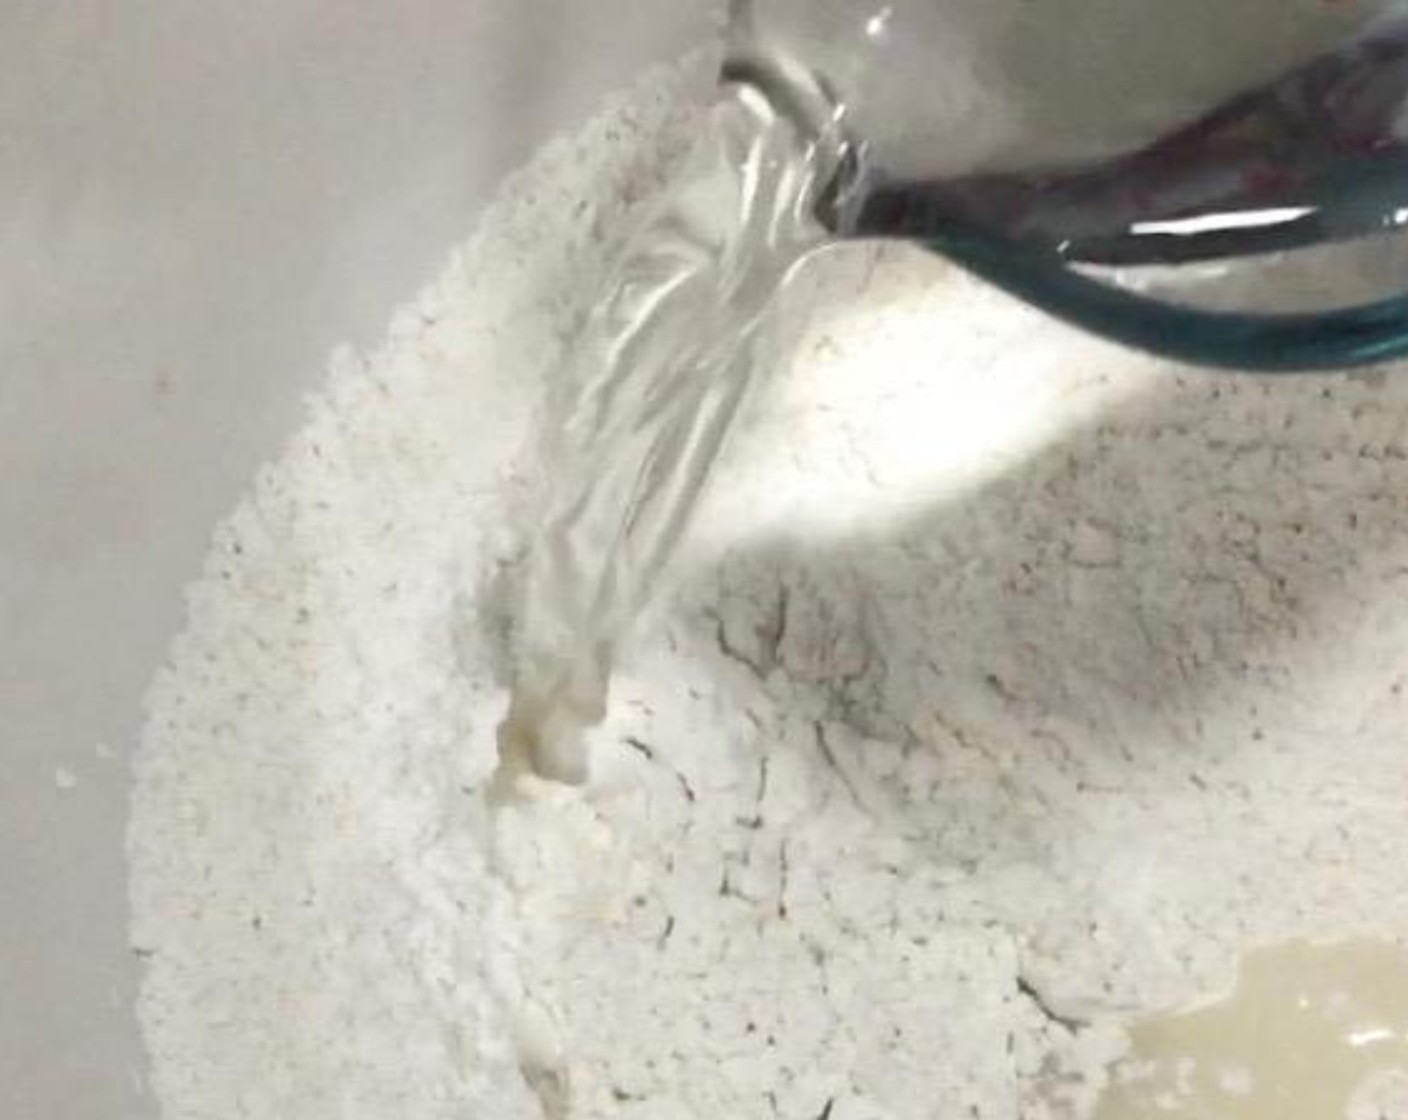 step 1 In a large mixing bowl, mix All-Purpose Flour (1 2/3 cups), Instant Dry Yeast (1 Tbsp), and Granulated Sugar (2/3 cup). Then, add in Water (3/4 cup) and mix well.